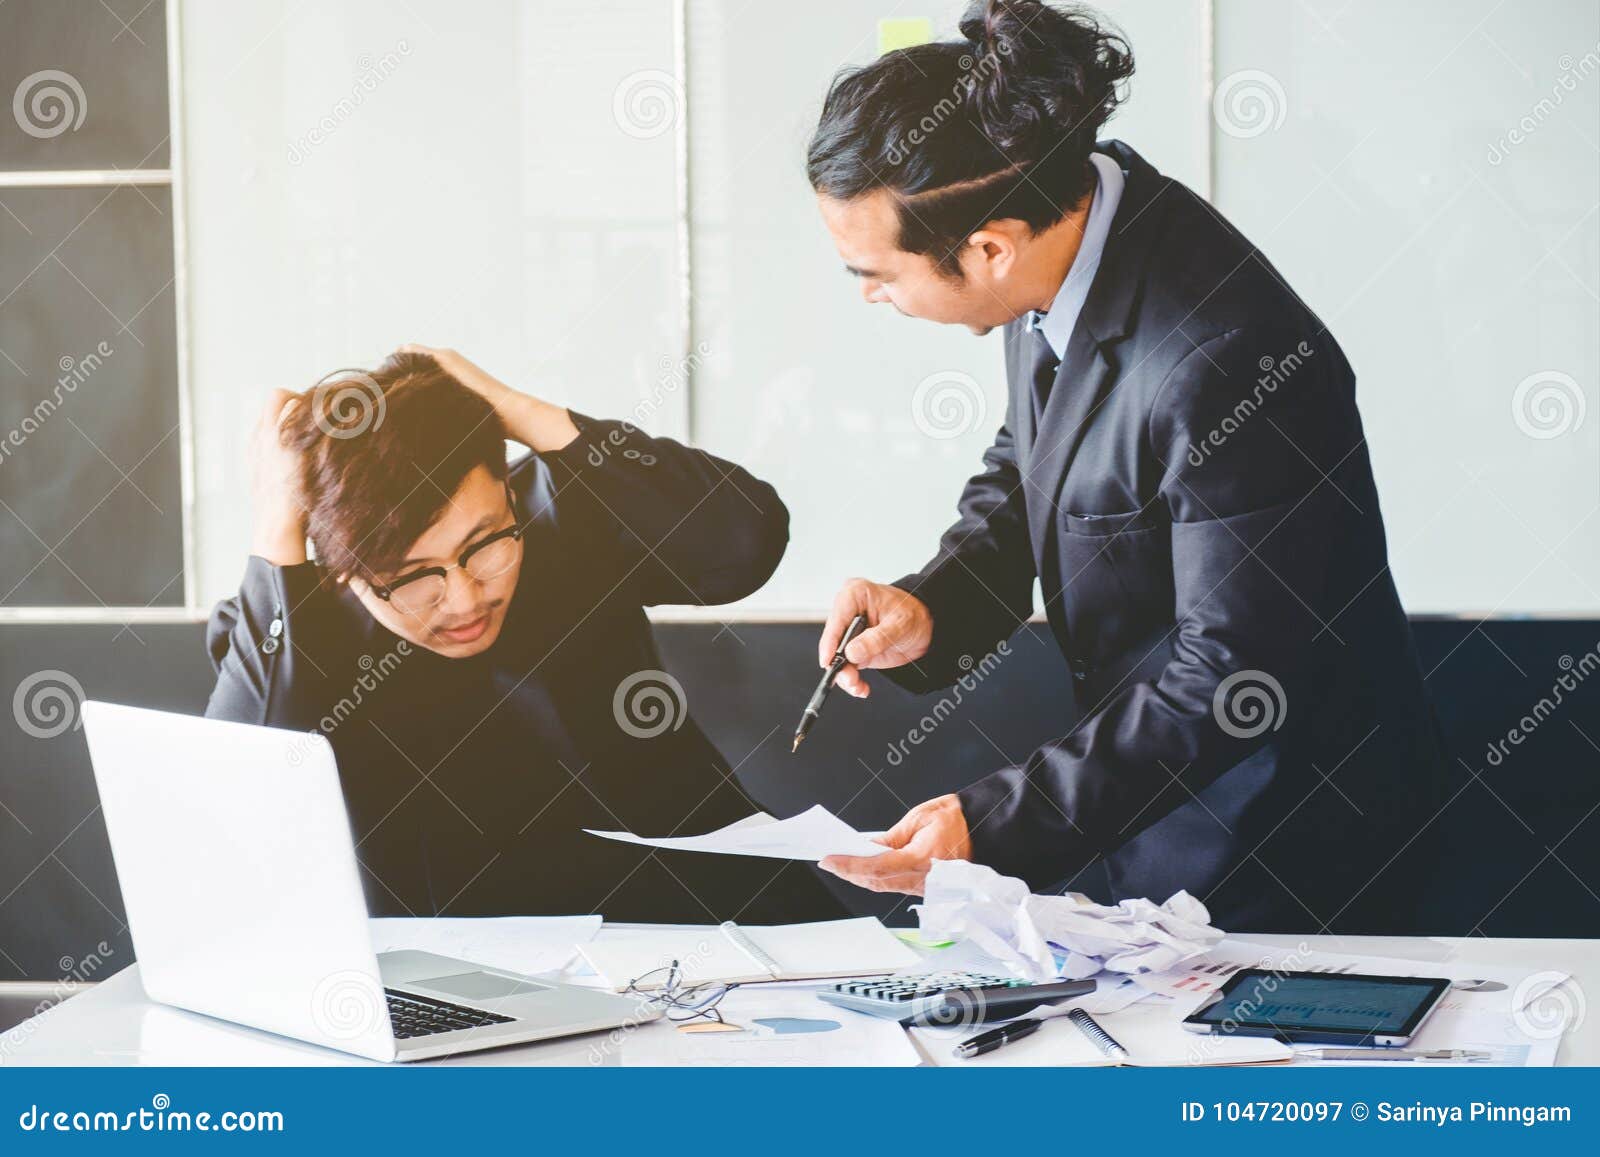 asian bad angry boss yelling at business man sad depressed employee reprimand from team leader missed deadline concept